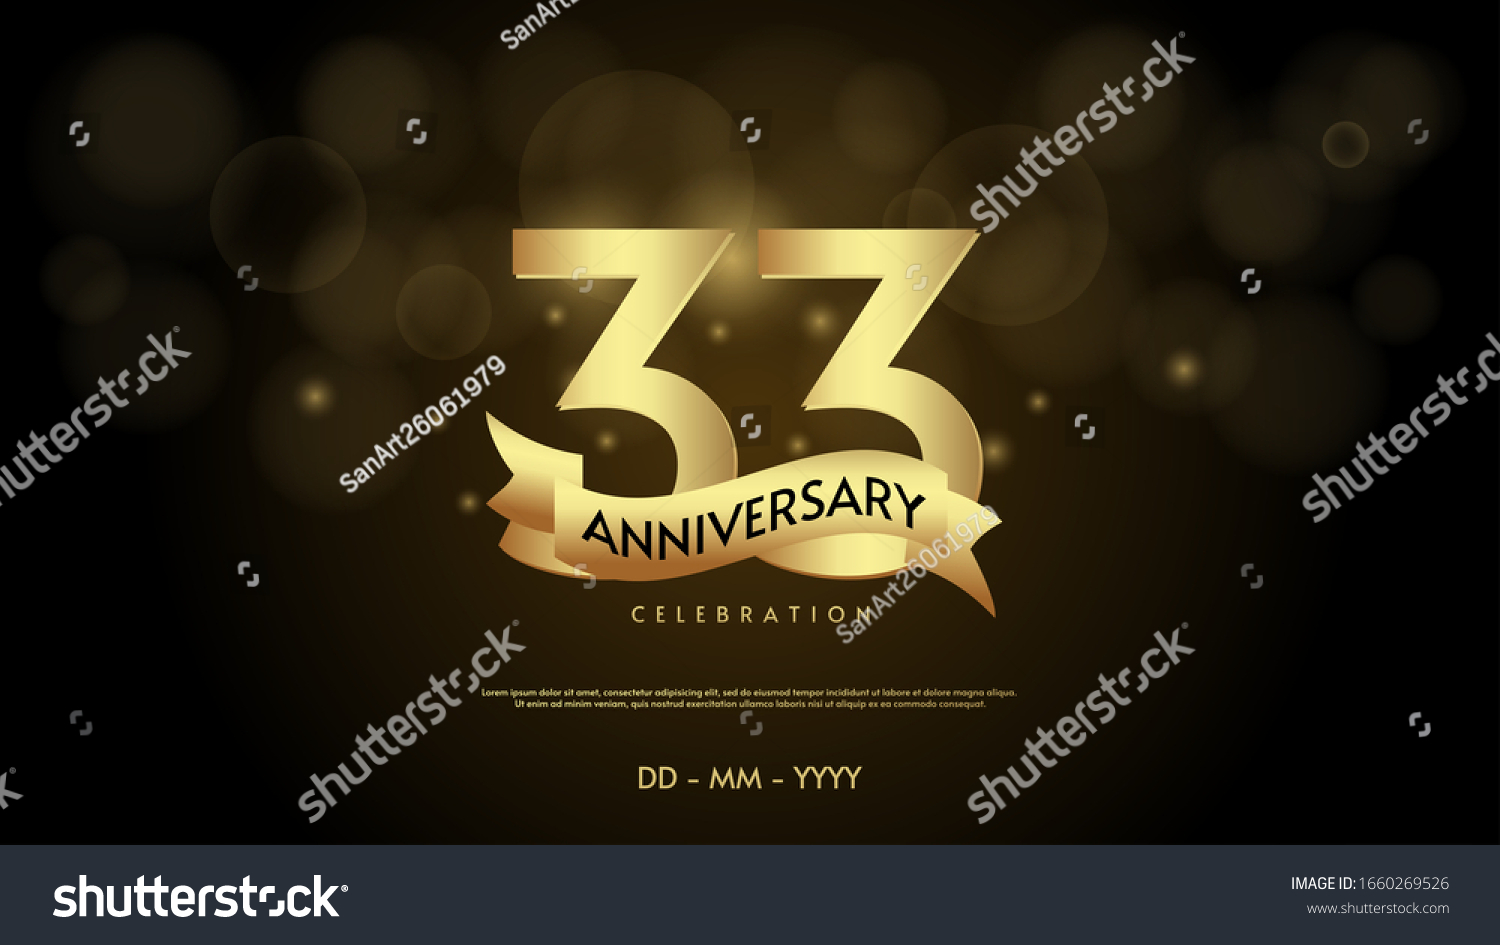 33rd anniversary background with illustrations - Royalty Free Stock ...